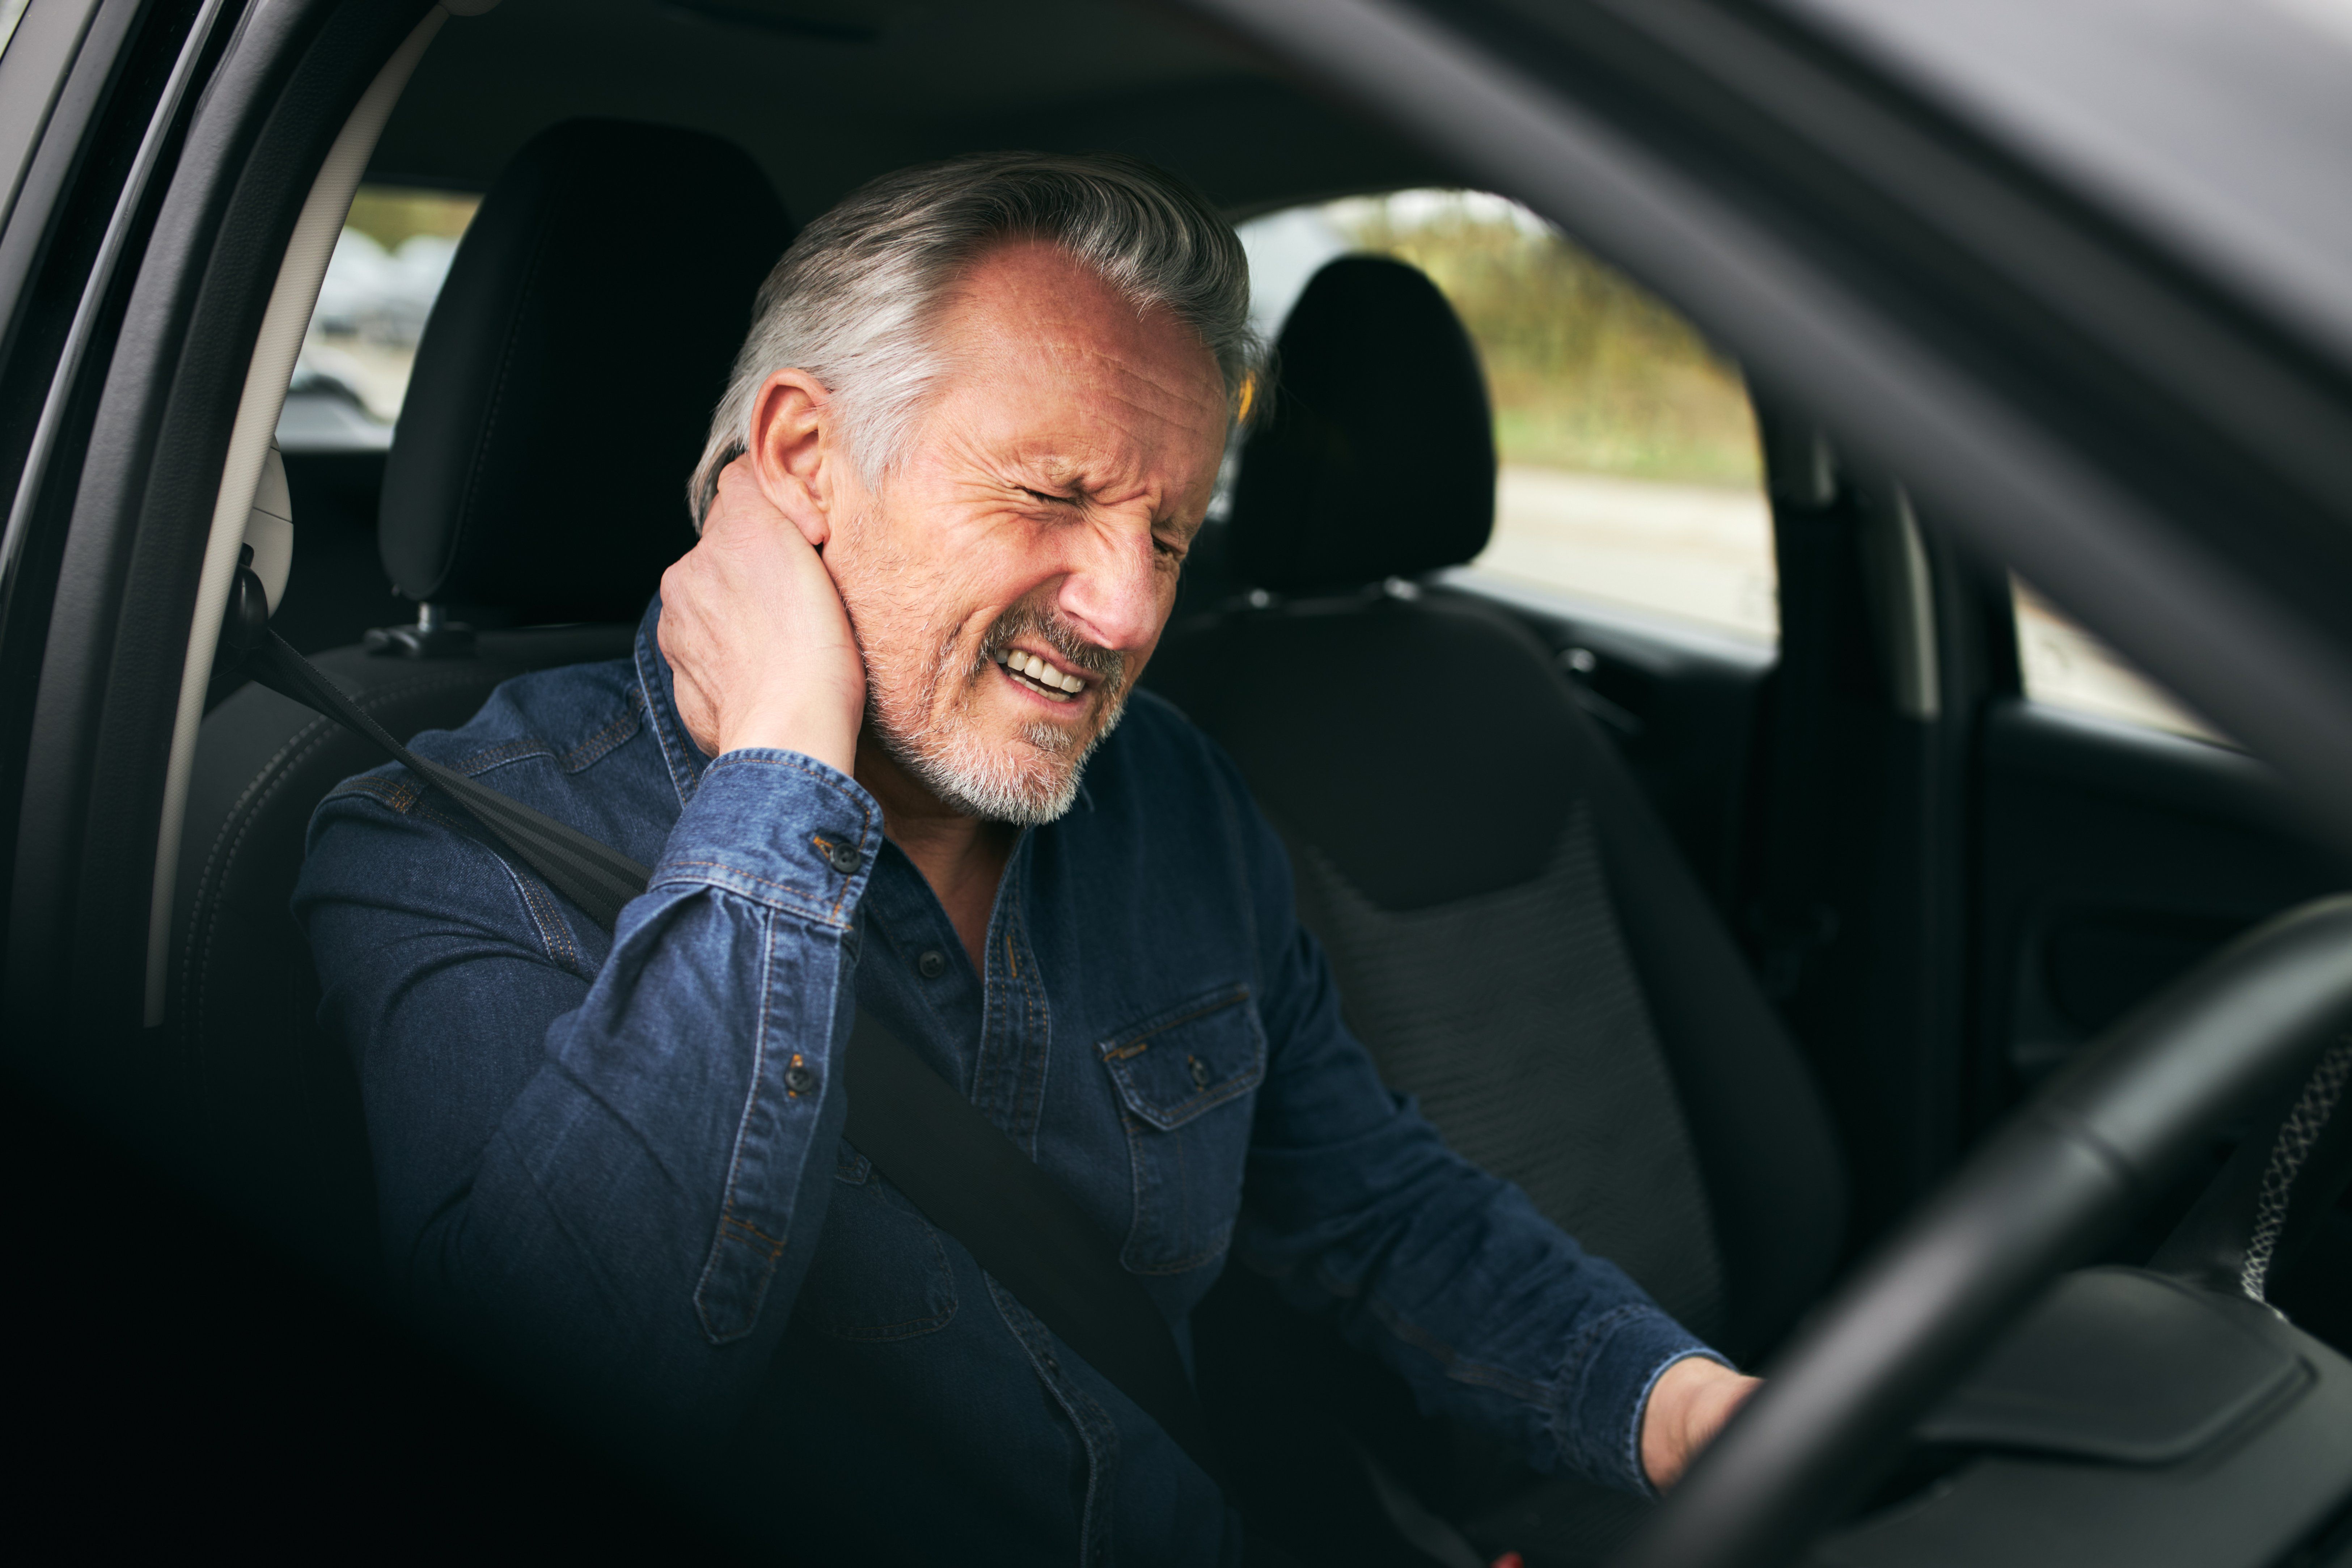 Benefits of Chiropractic Care for Whiplash